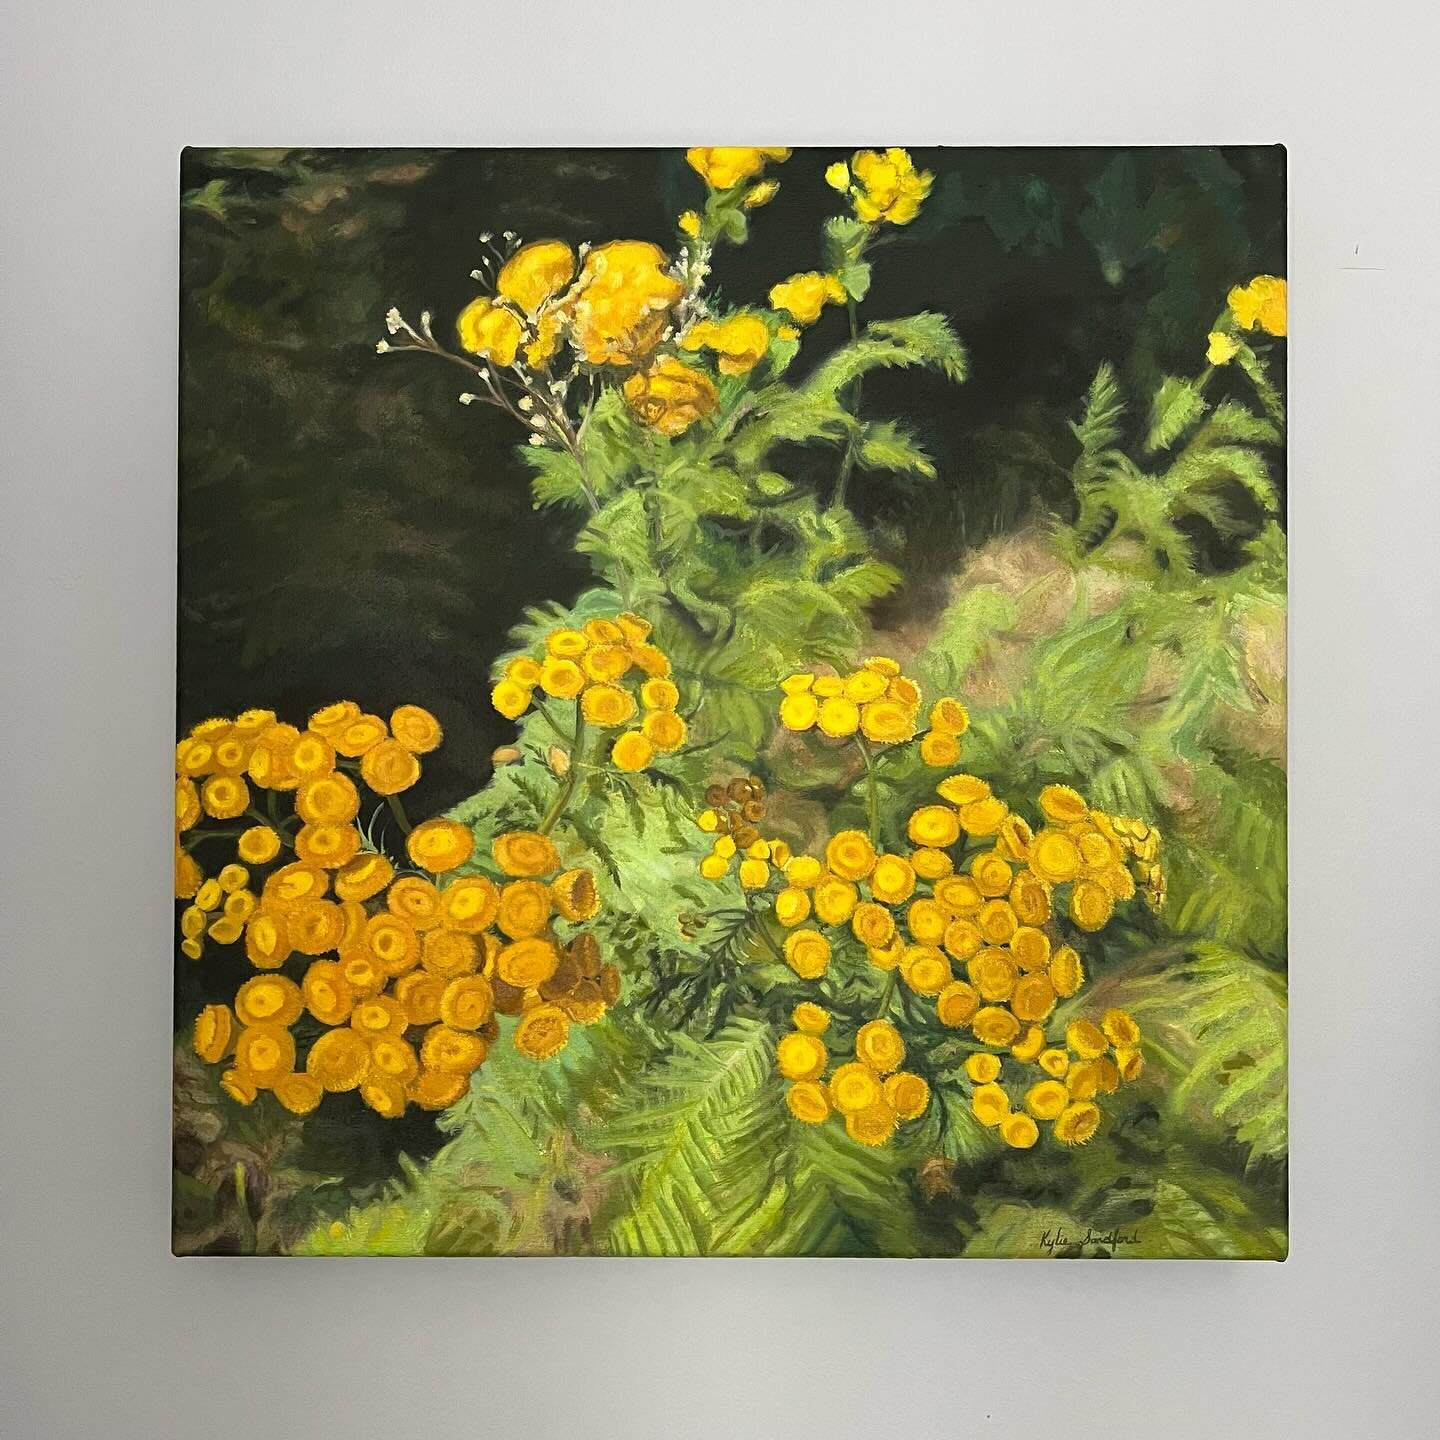 Tansy. Isn&rsquo;t it the prettiest with its lovely yellow buttons? 
18x18&rdquo; oil on canvas 2023 just off the easel.
#offtheeasel #unvarnished #forthosewholovetopaint #yellow #cadmium #naturepatterns #flowers #summerday